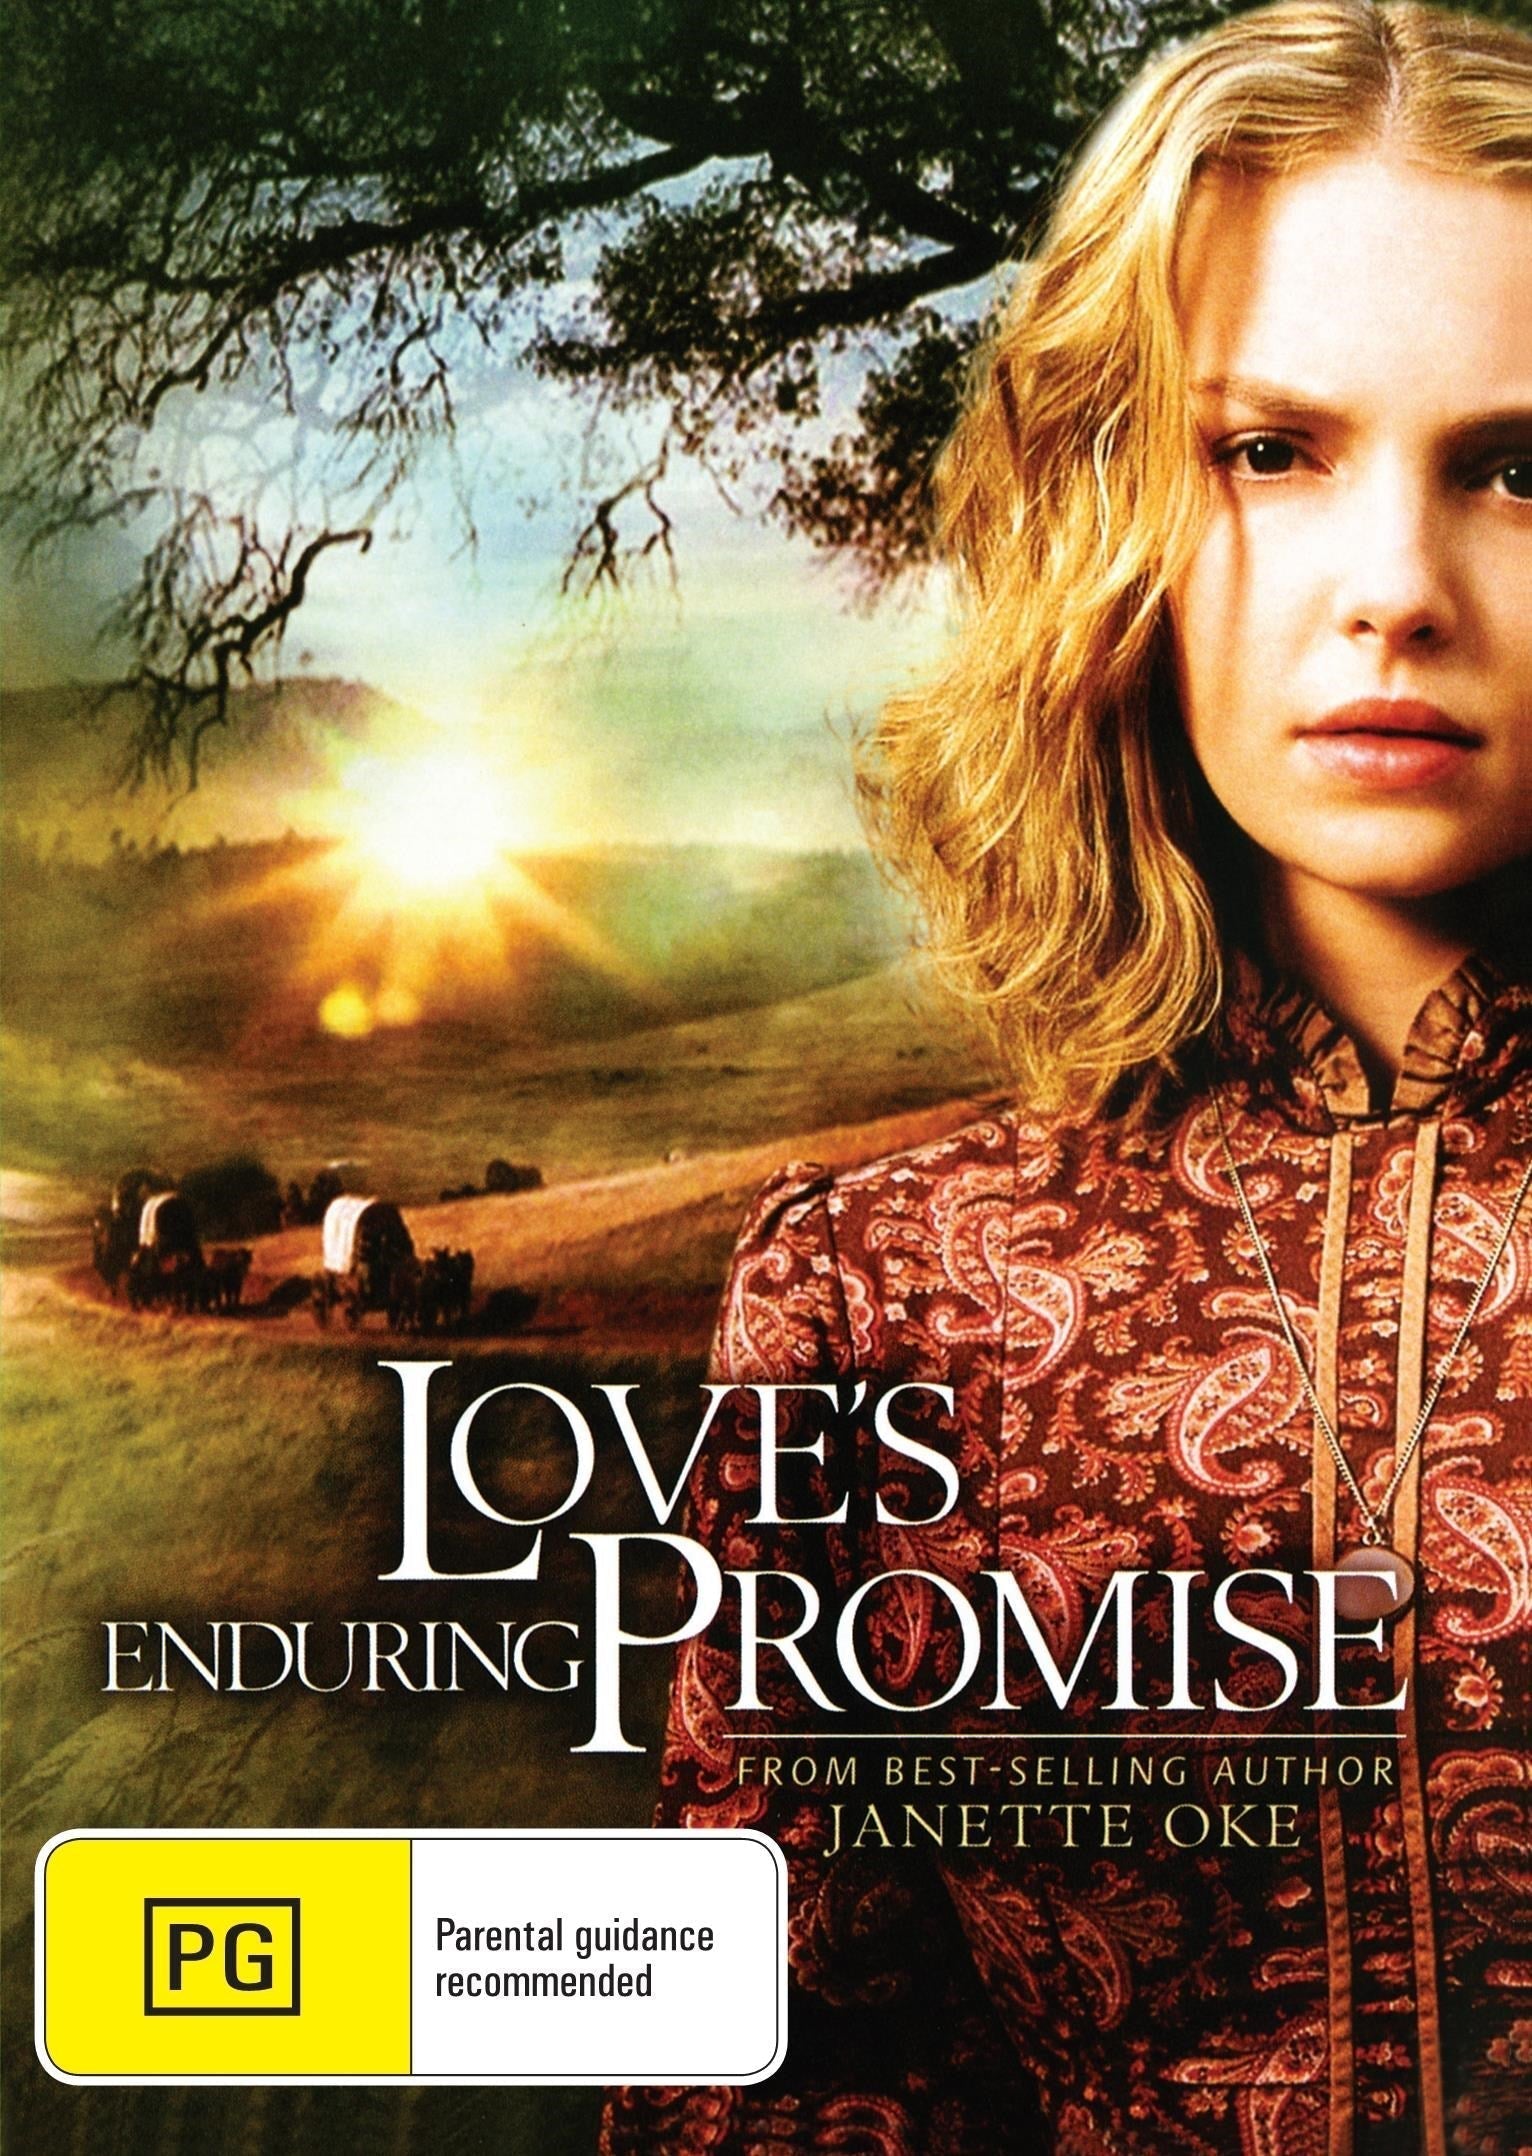 Love's Enduring Promise rareandcollectibledvds